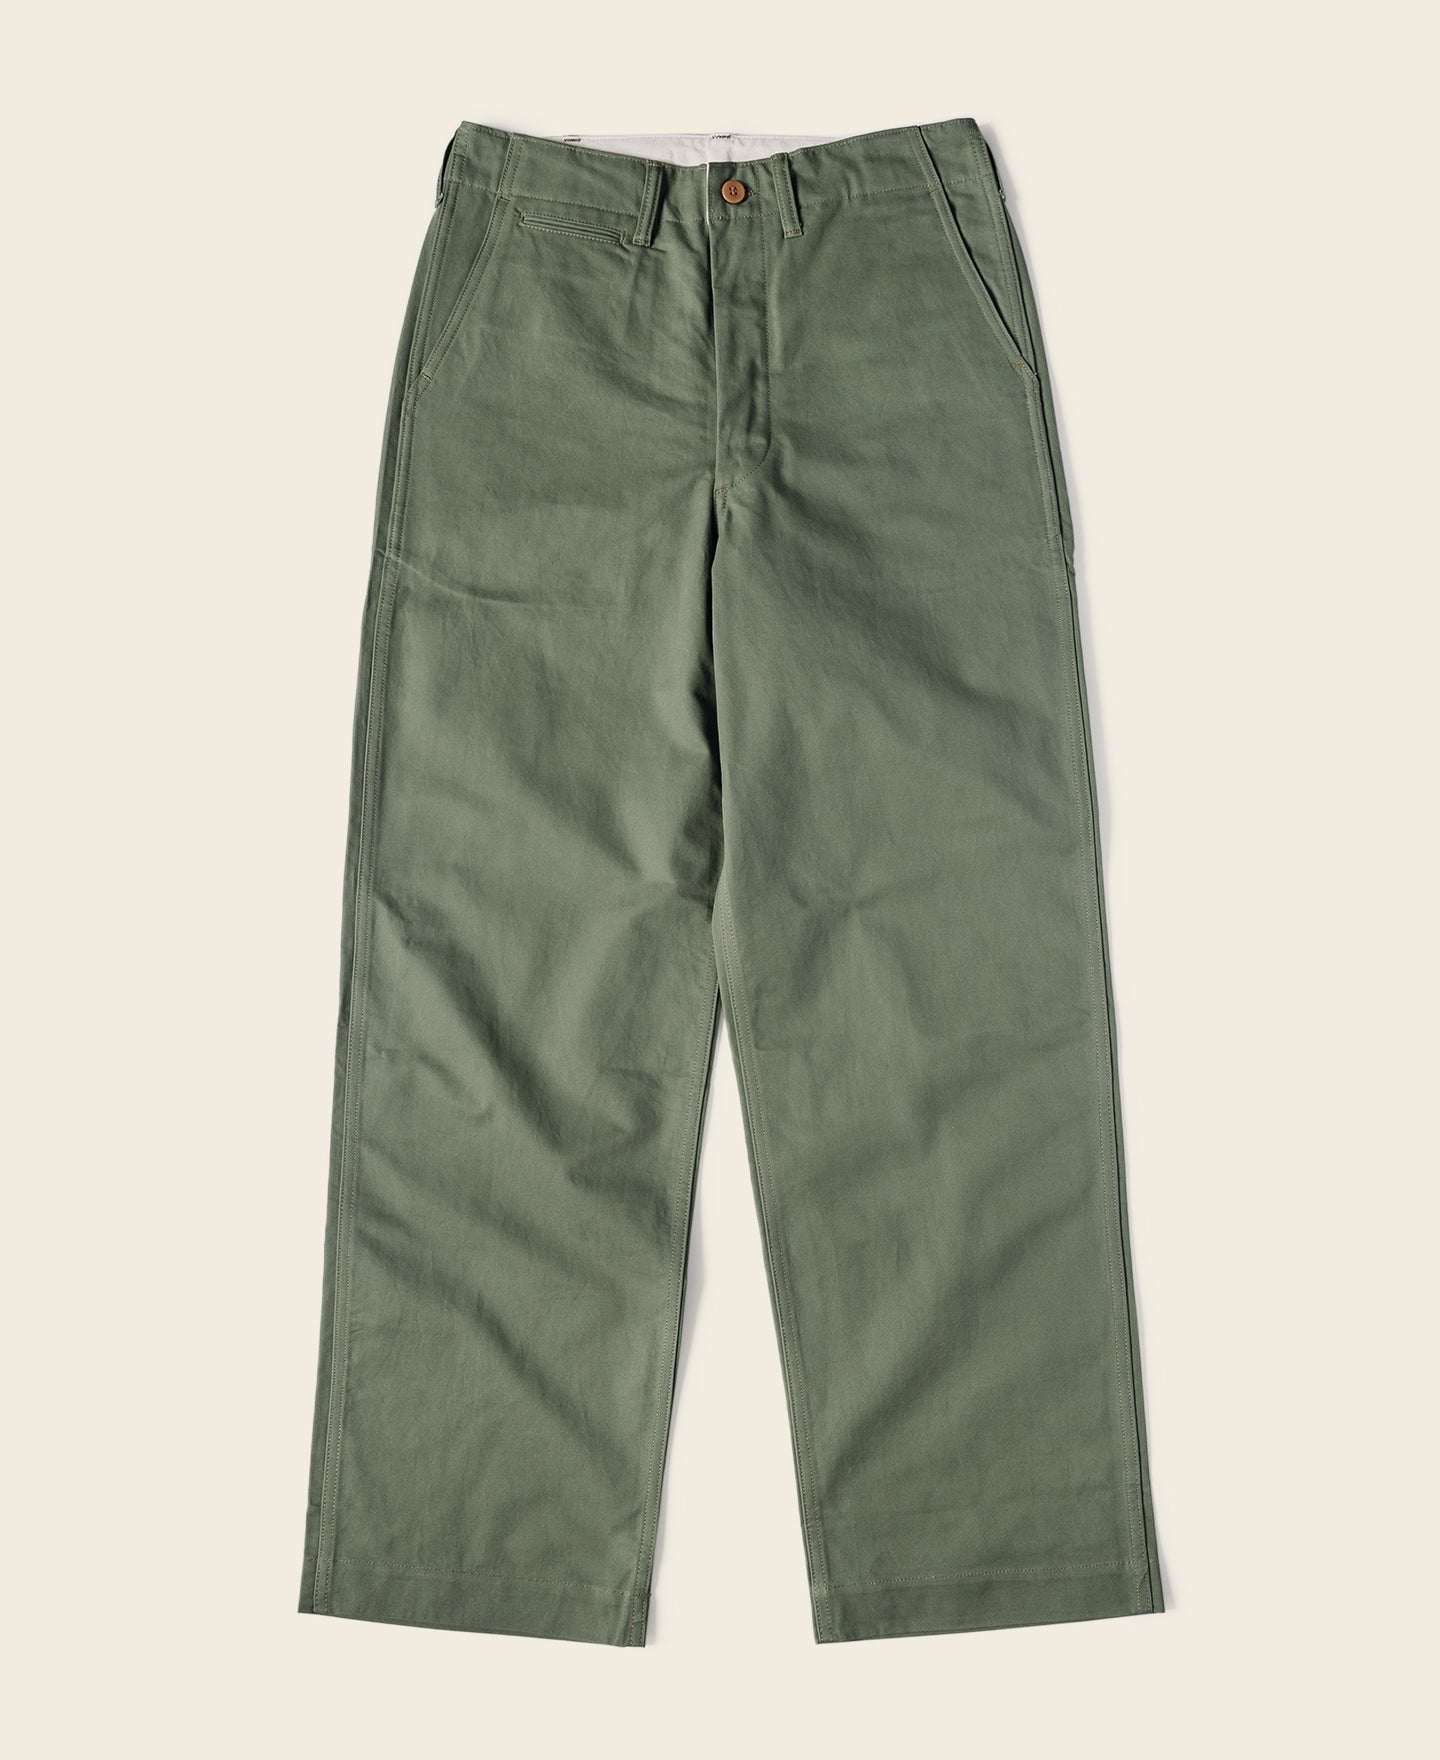 Men's Pants & Trousers | Military, Cargo, Twill, & More | Bronson